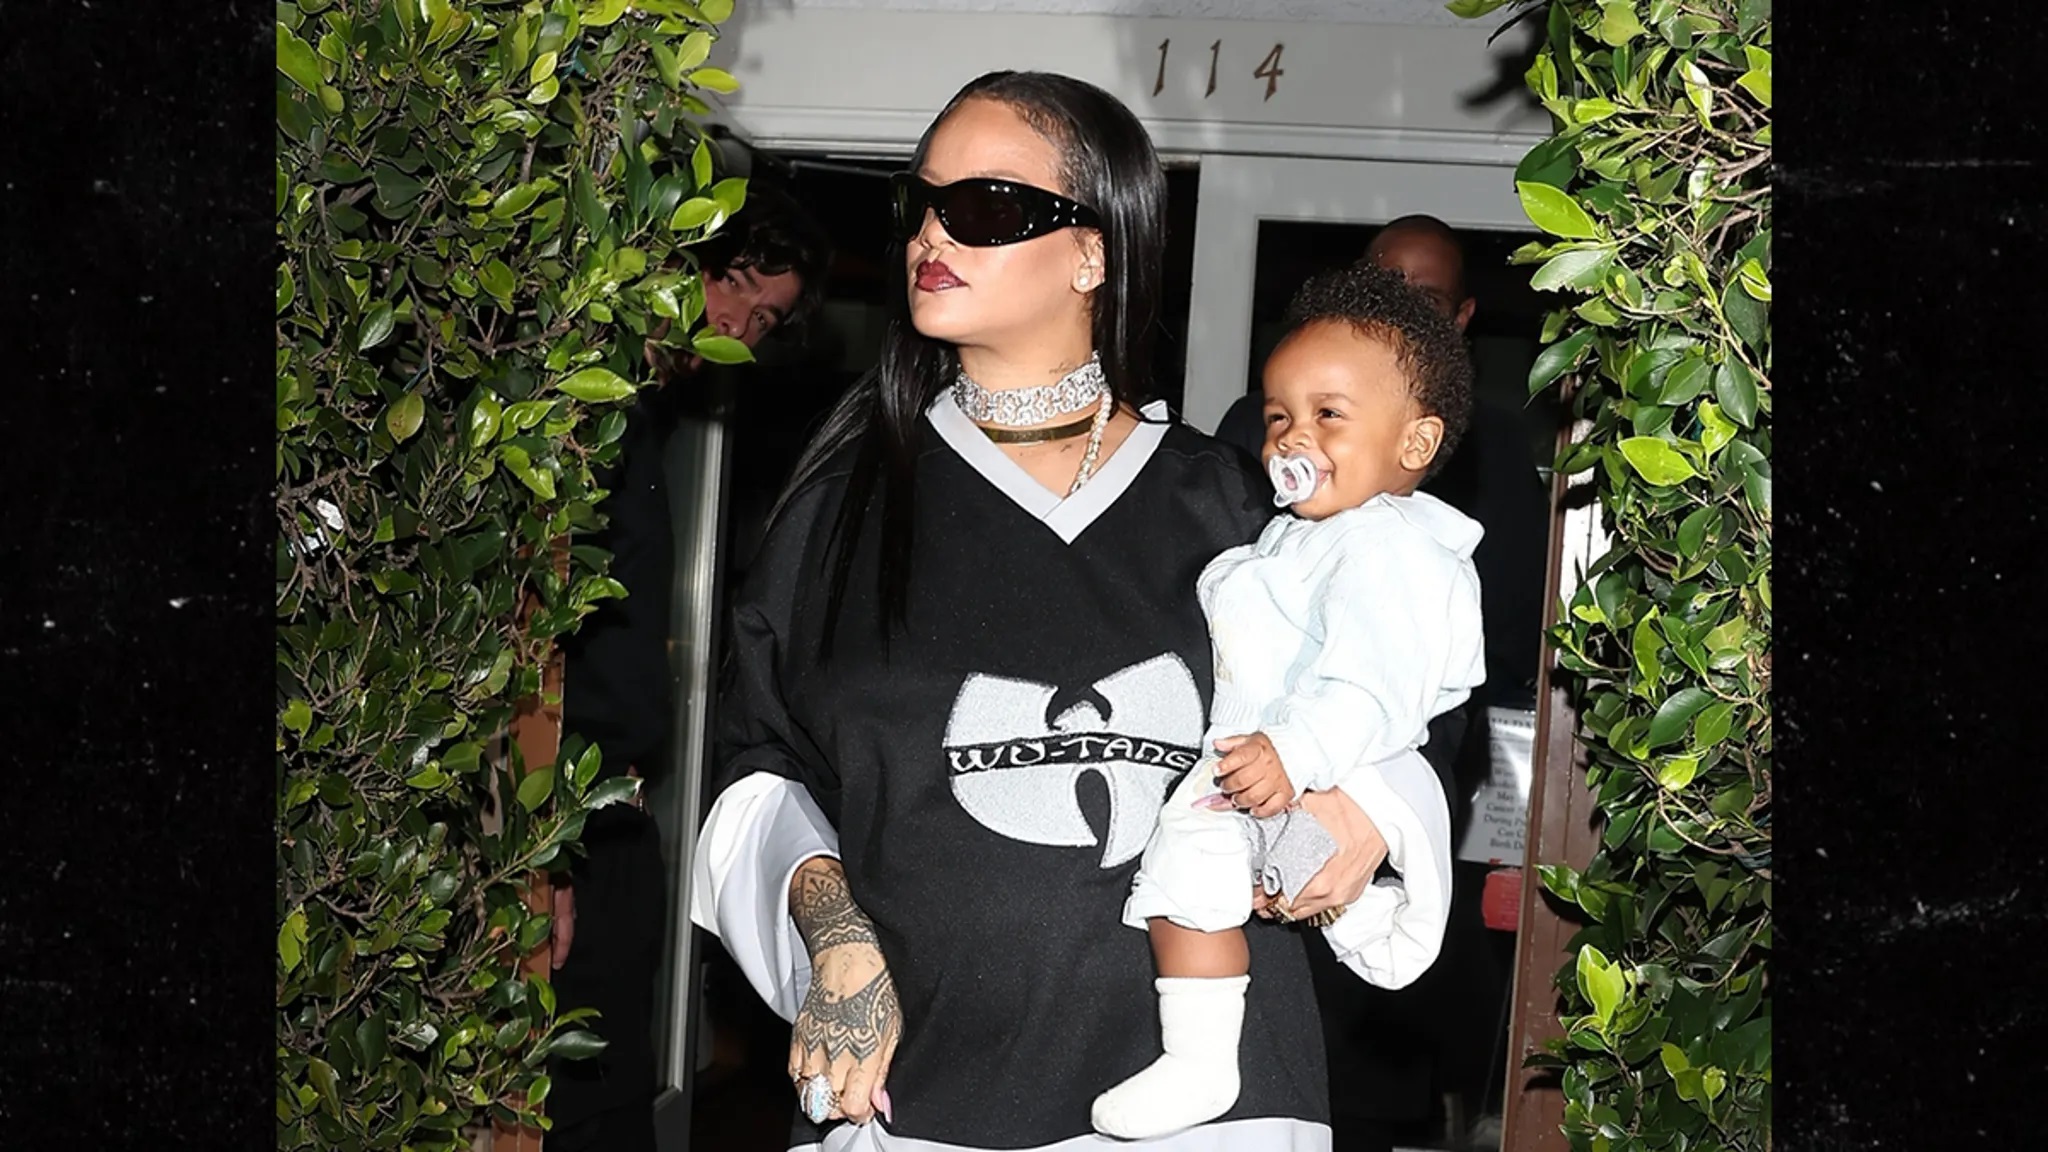 Rihanna and A$AP Rocky Name Their Son After Wu-Tang Clan Leader RZA